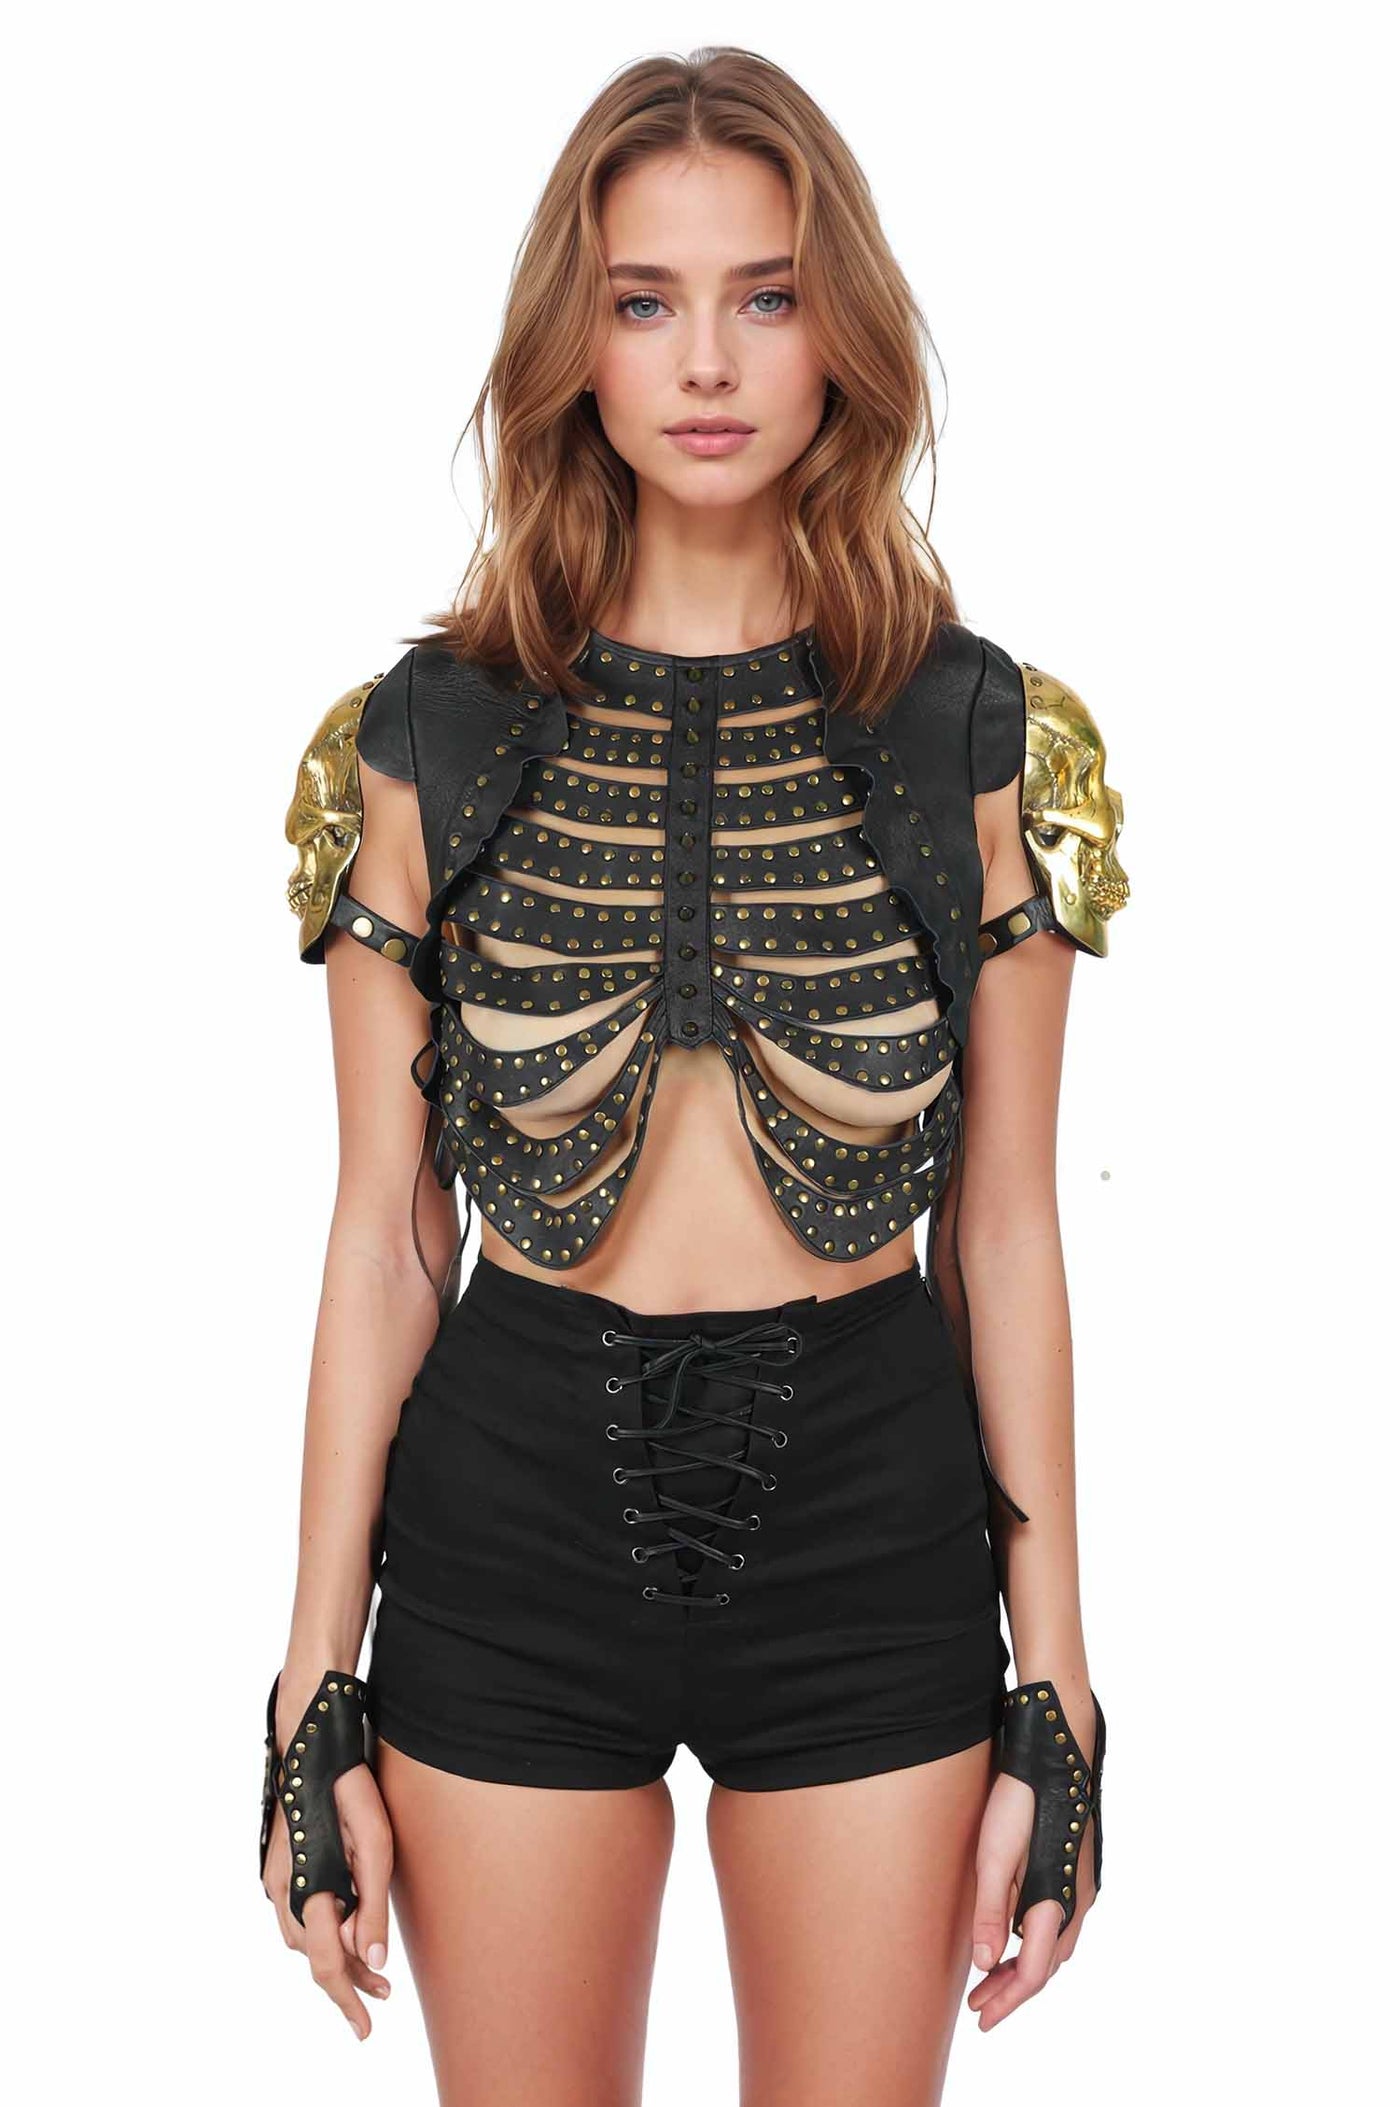 Black leather skeleton harness with gold skull shoulder pads from Love Khaos